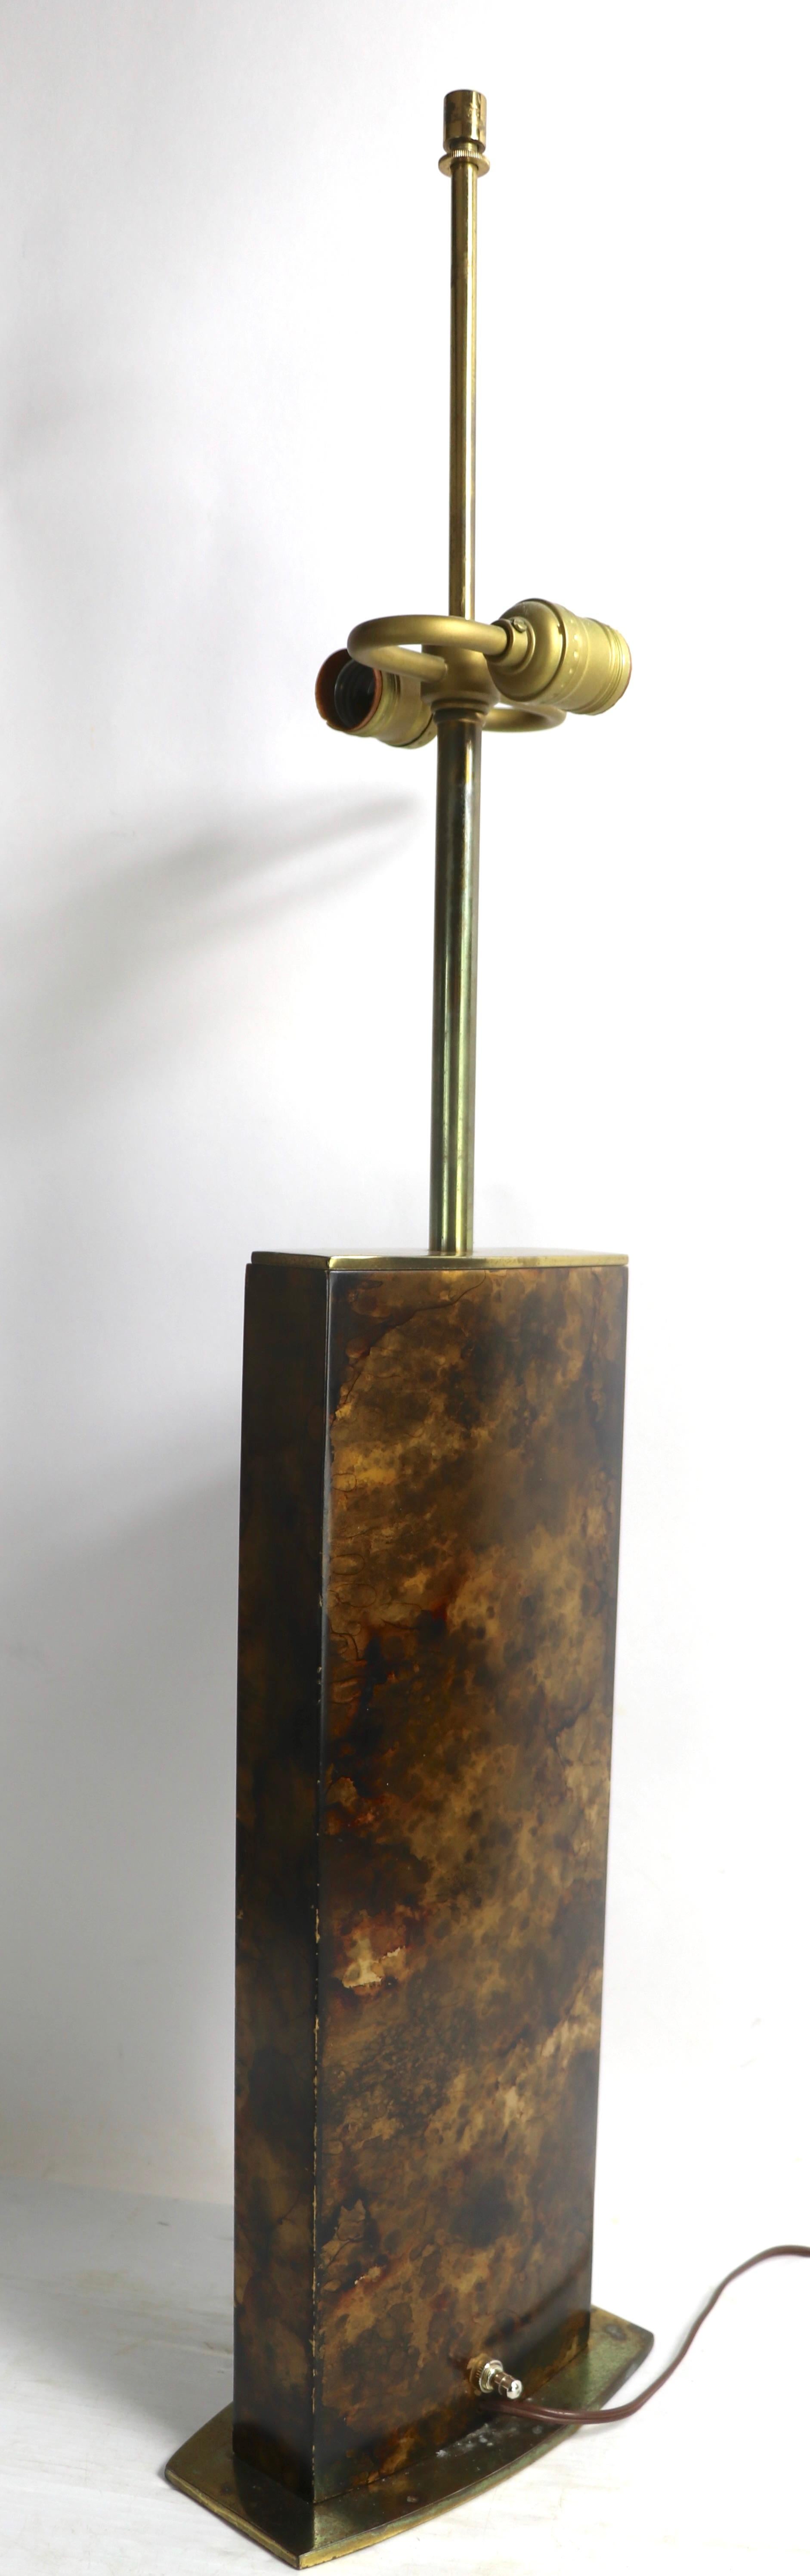 Faux Tortoise Shell Finish Table Lamp by Mutual Sunset Lamp Manufacturing Co. In Good Condition For Sale In New York, NY